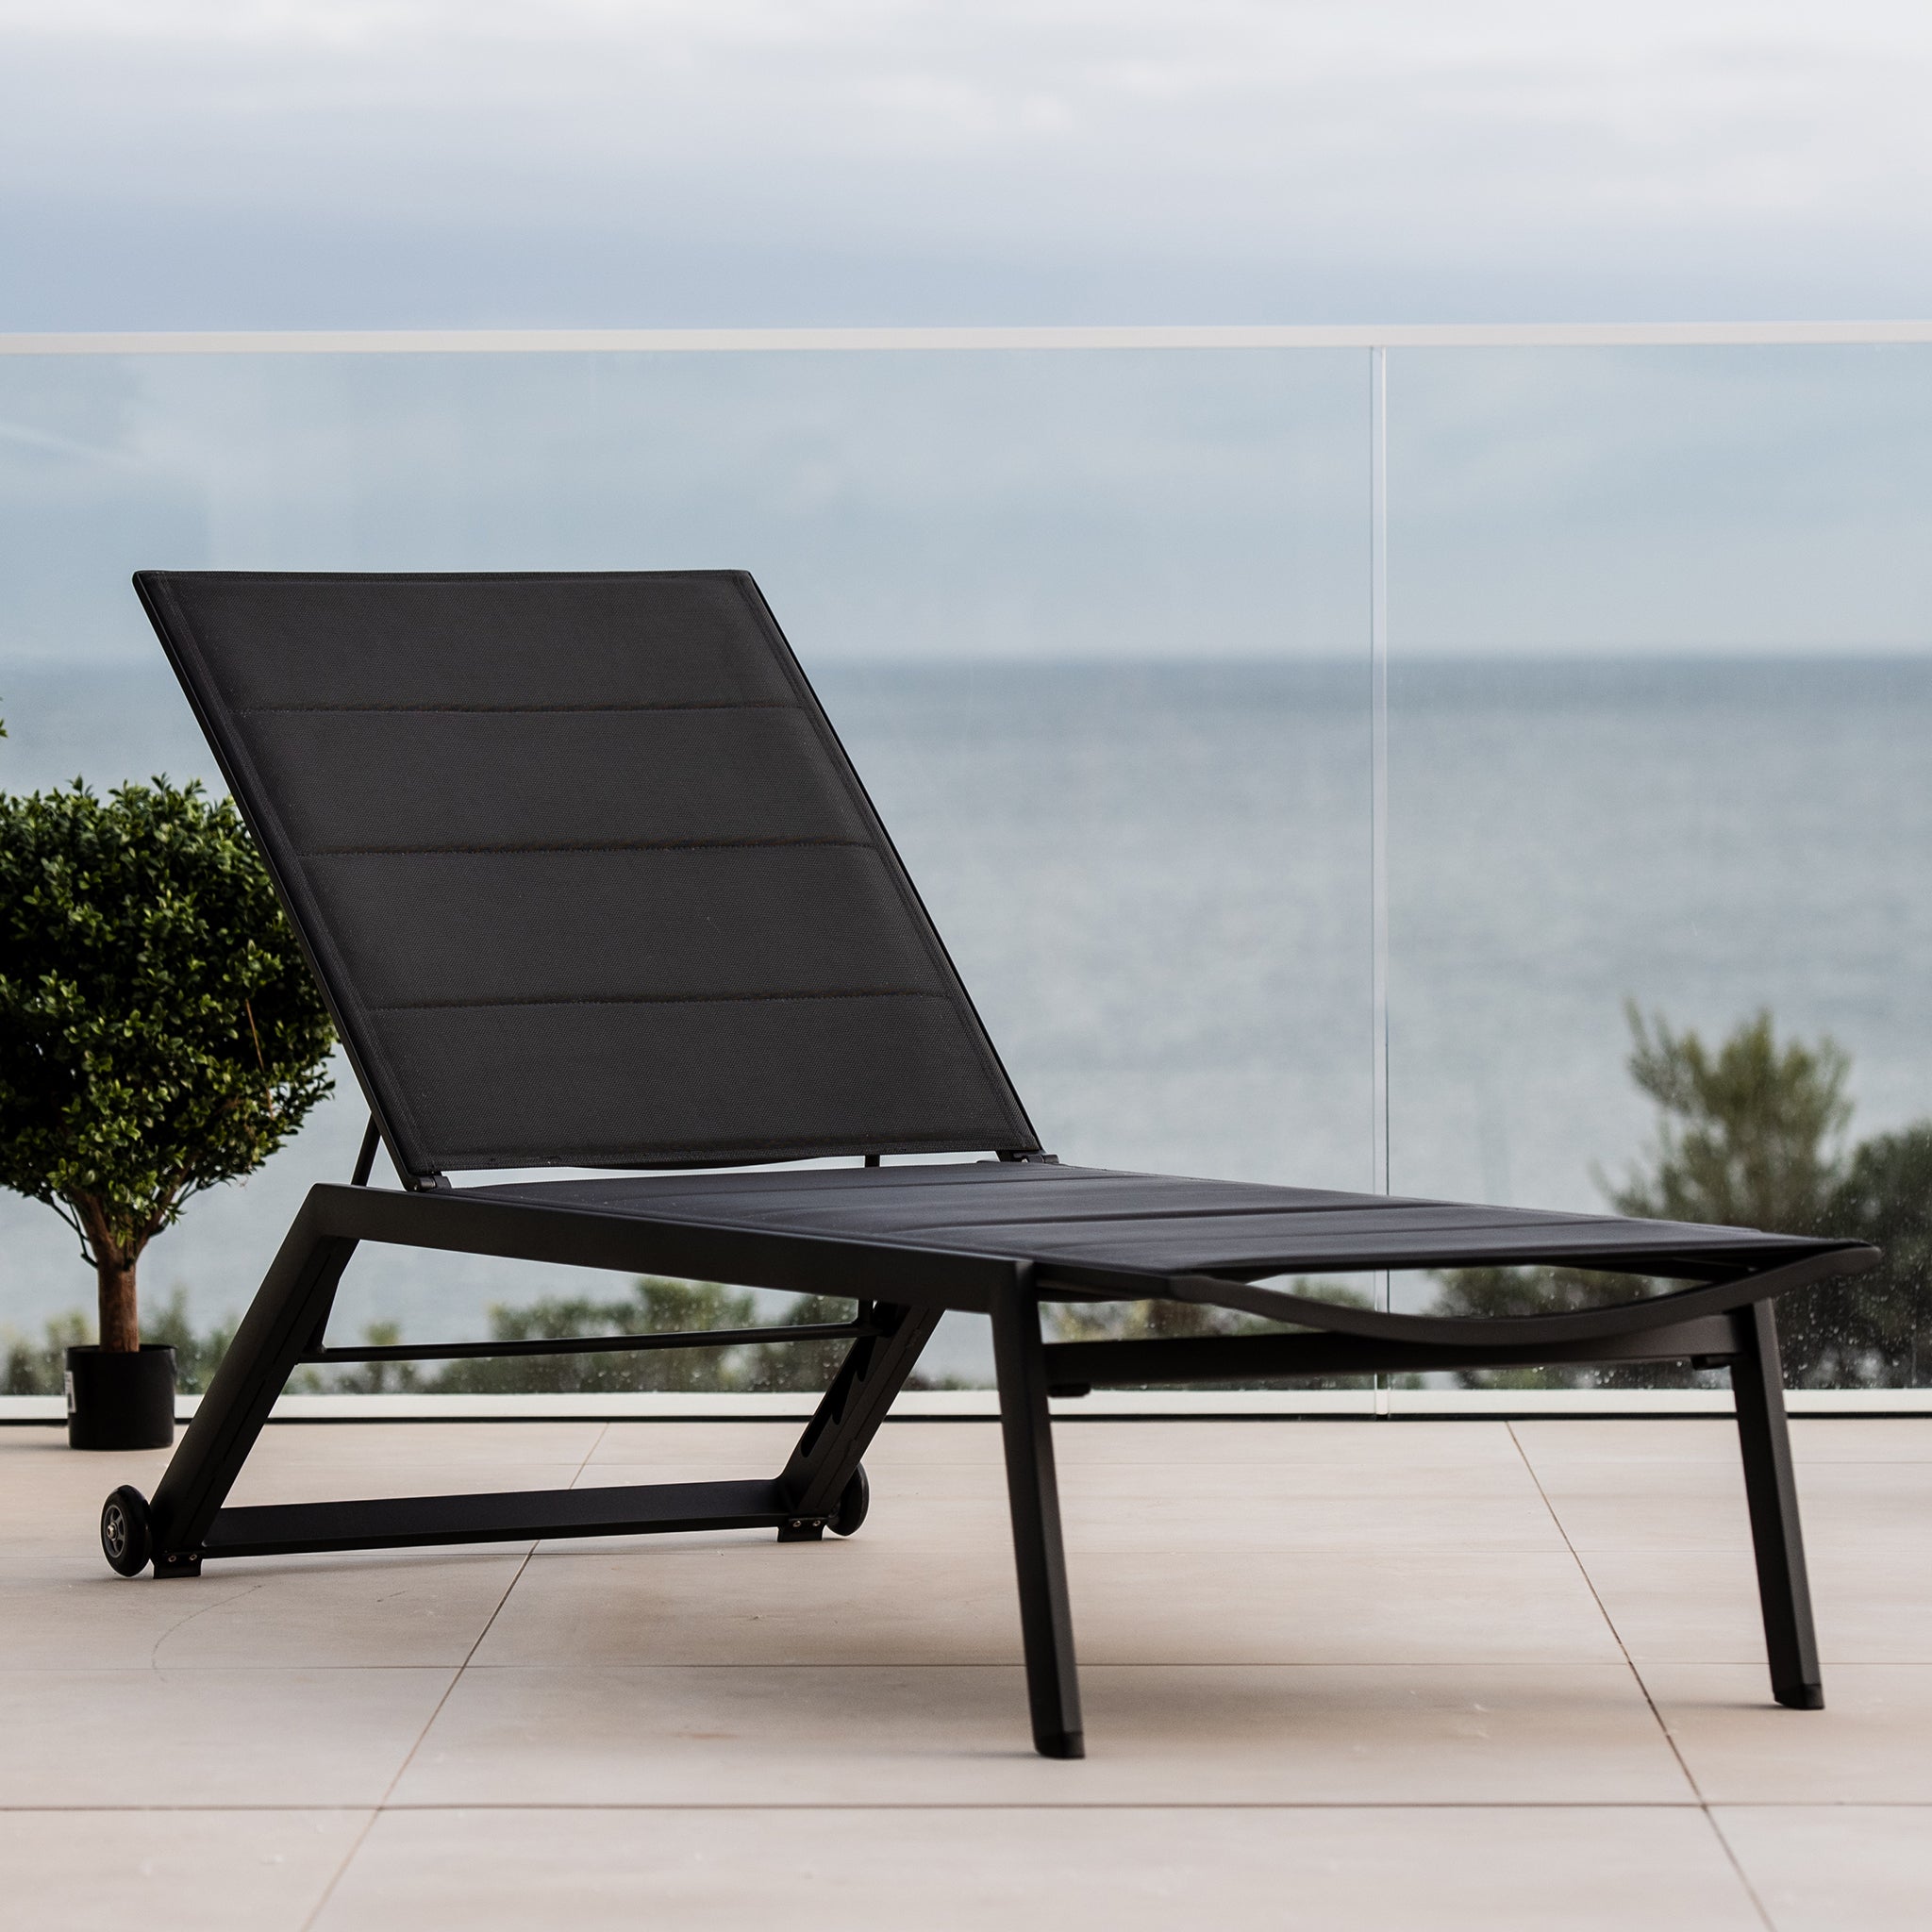 Monaco Padded Sunlounger in Charcoal